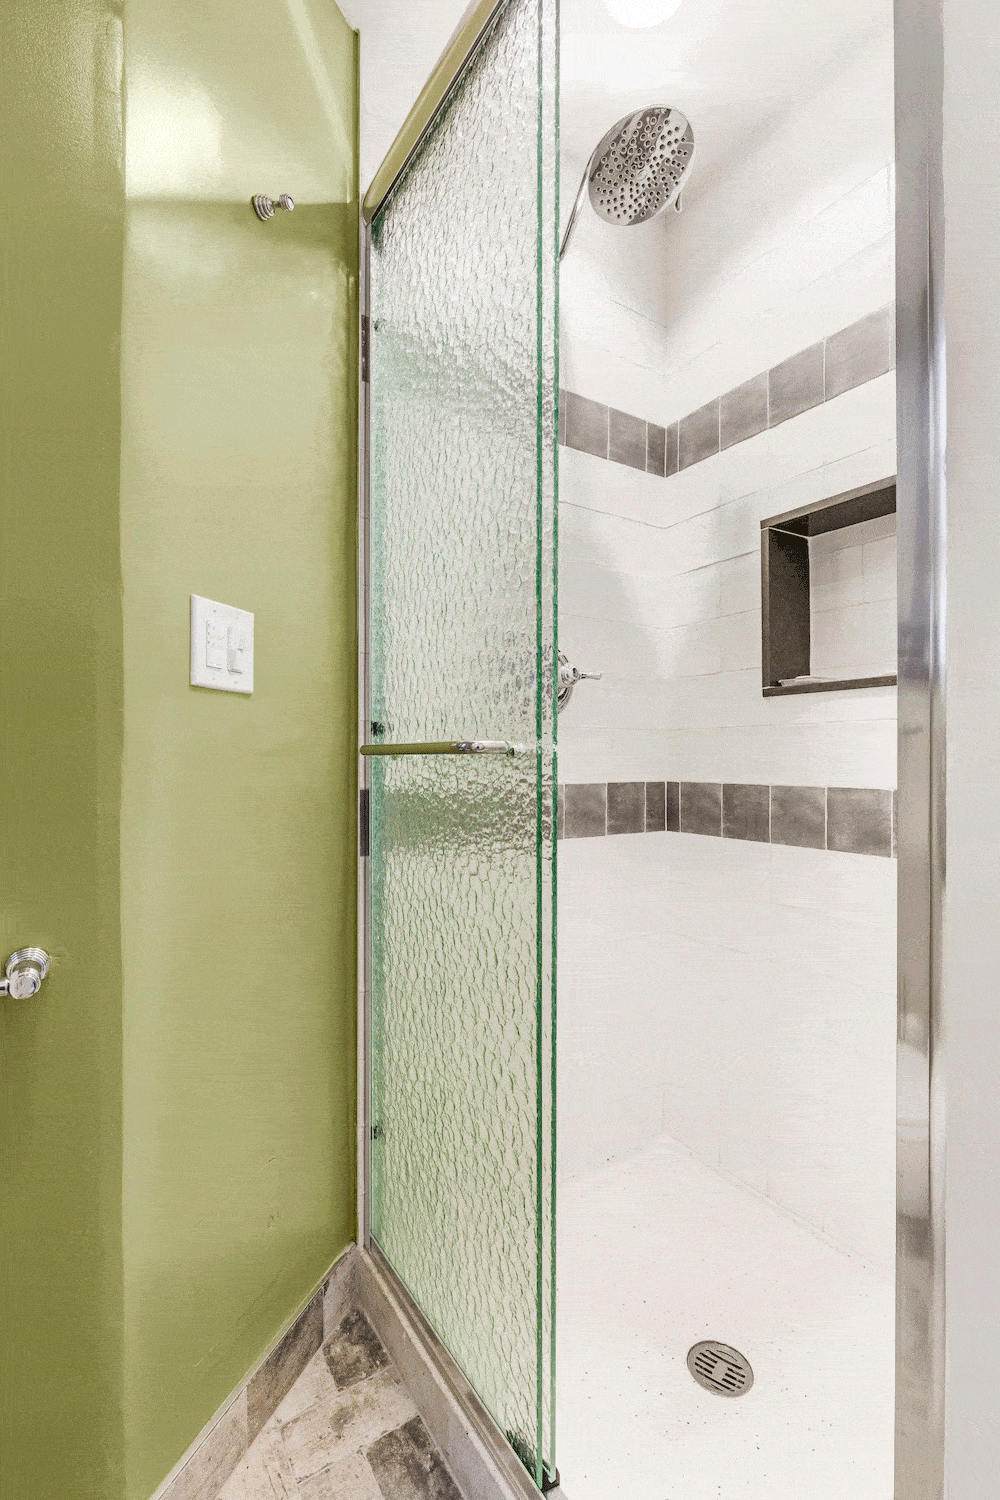 Frosted glass sliding door leading to white shower area after renovation